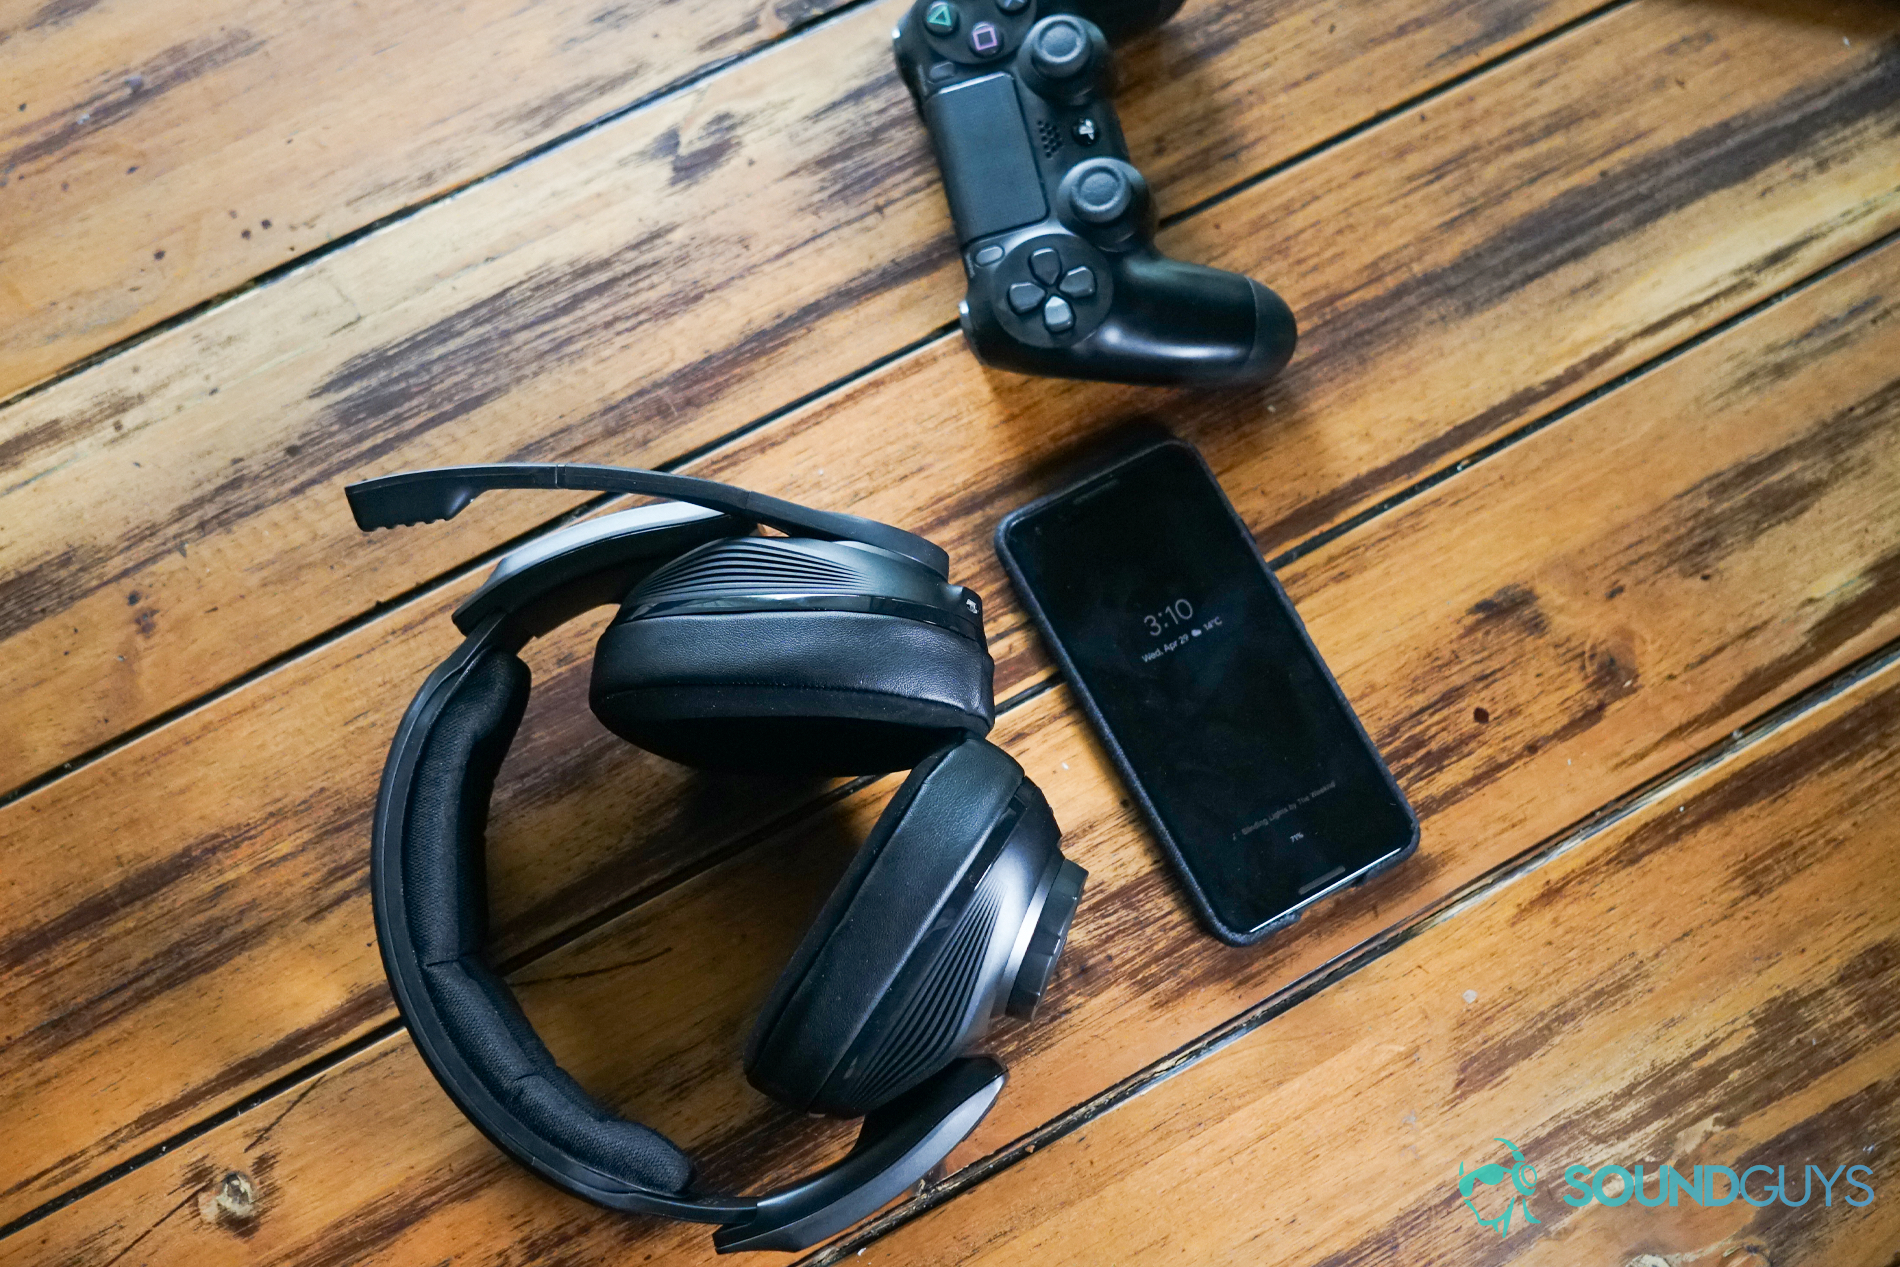 The Sennheiser GSP 670 lays on a table next to a PlayStation 4 DualShock controller and a Google Pixel 3.